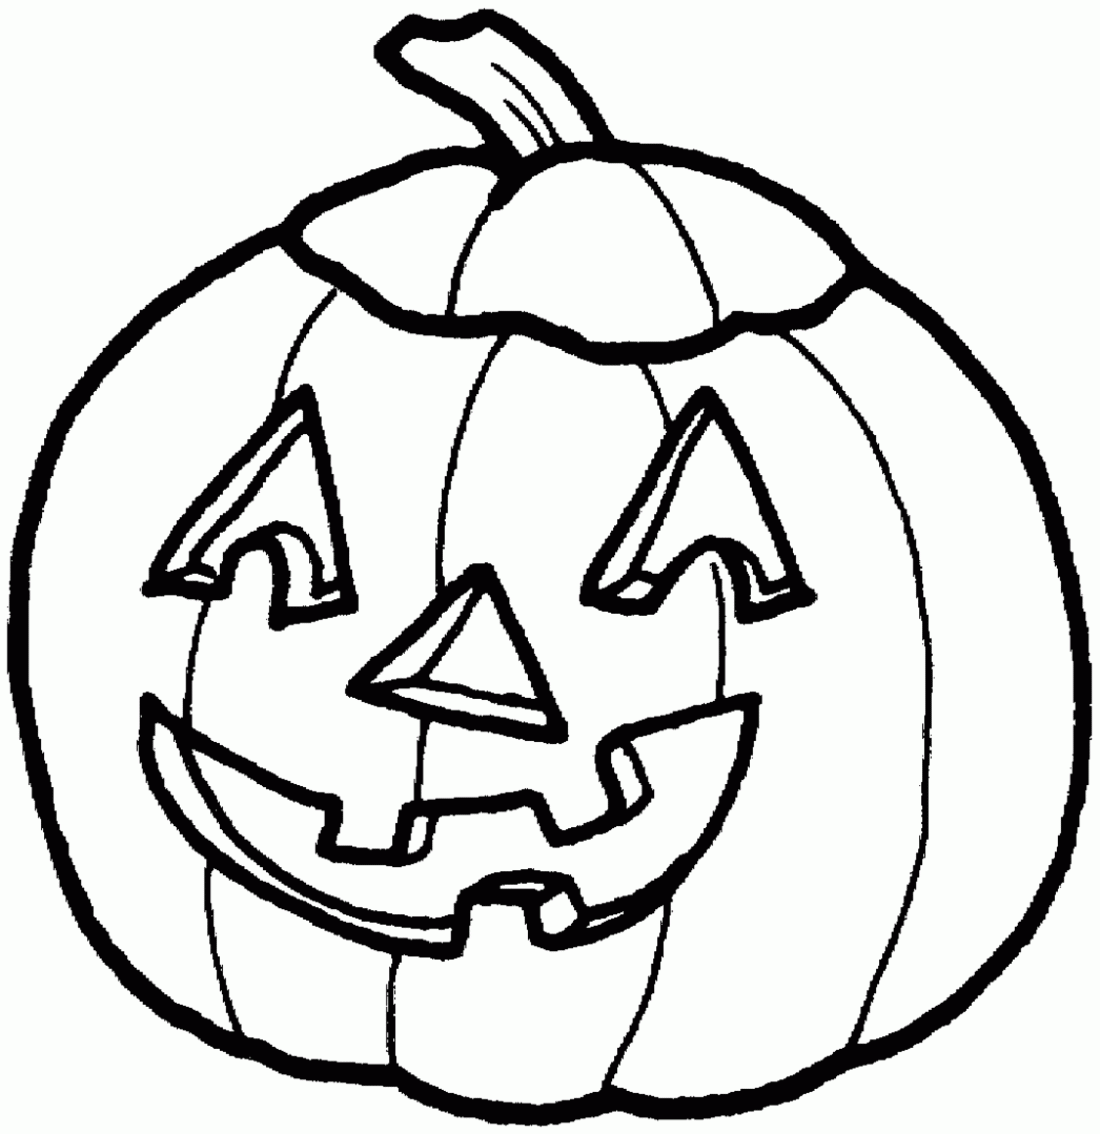 halloween pumpkin pictures to print and color halloween coloring pages getcoloringpagescom color halloween pumpkin pictures print to and 